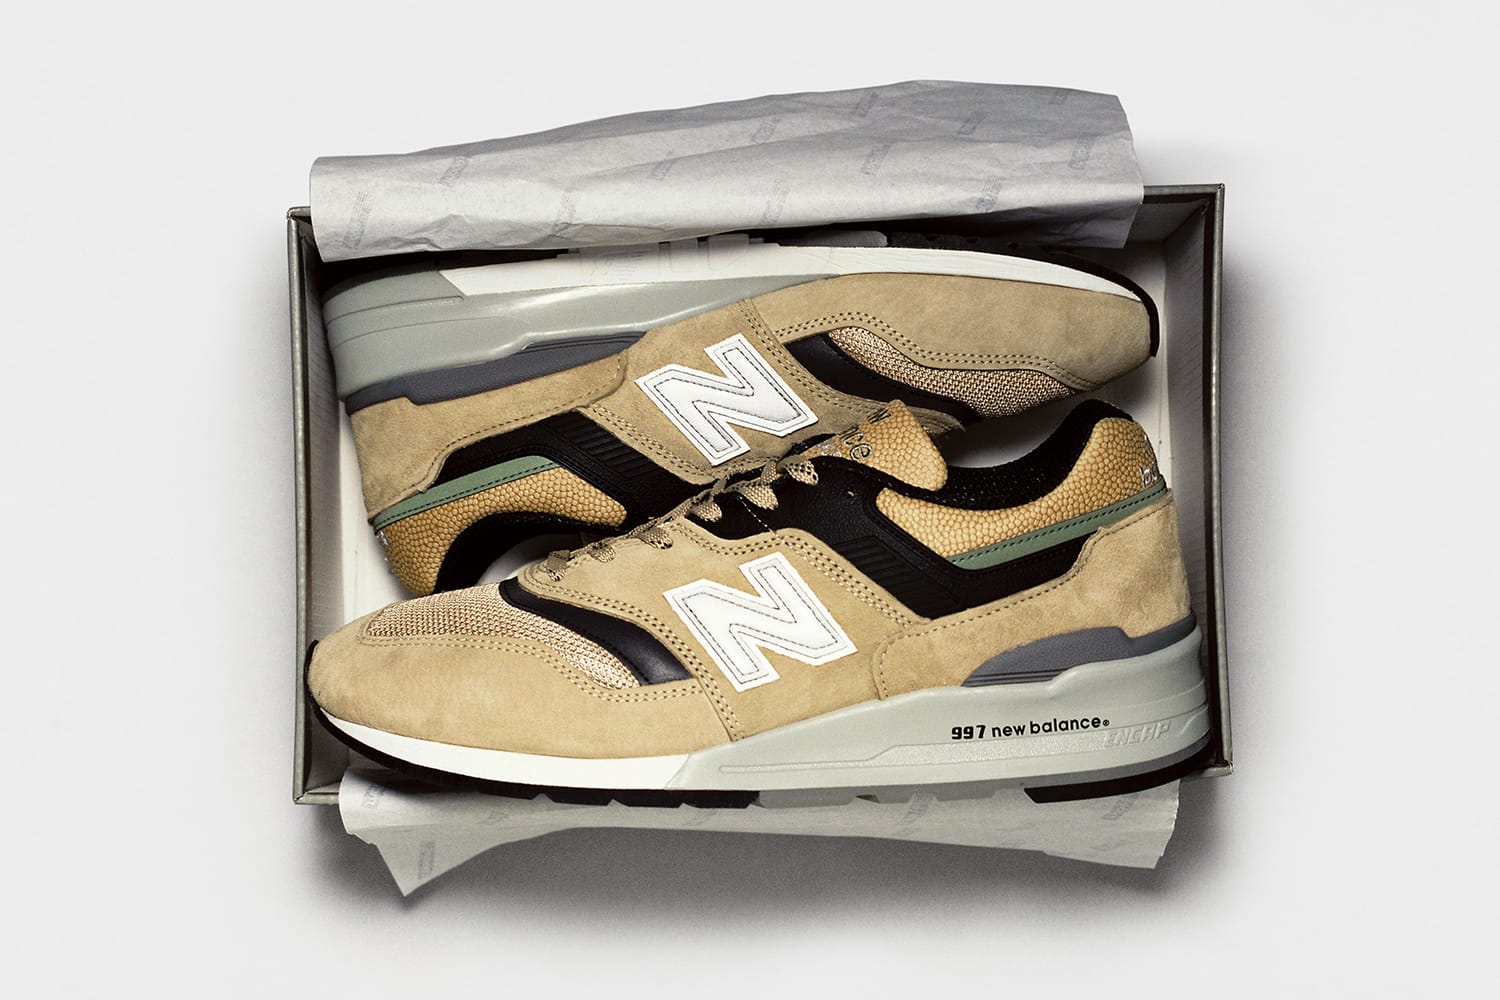 thisisneverthat x New Balance M997 Capsule Collection | Hypebeast